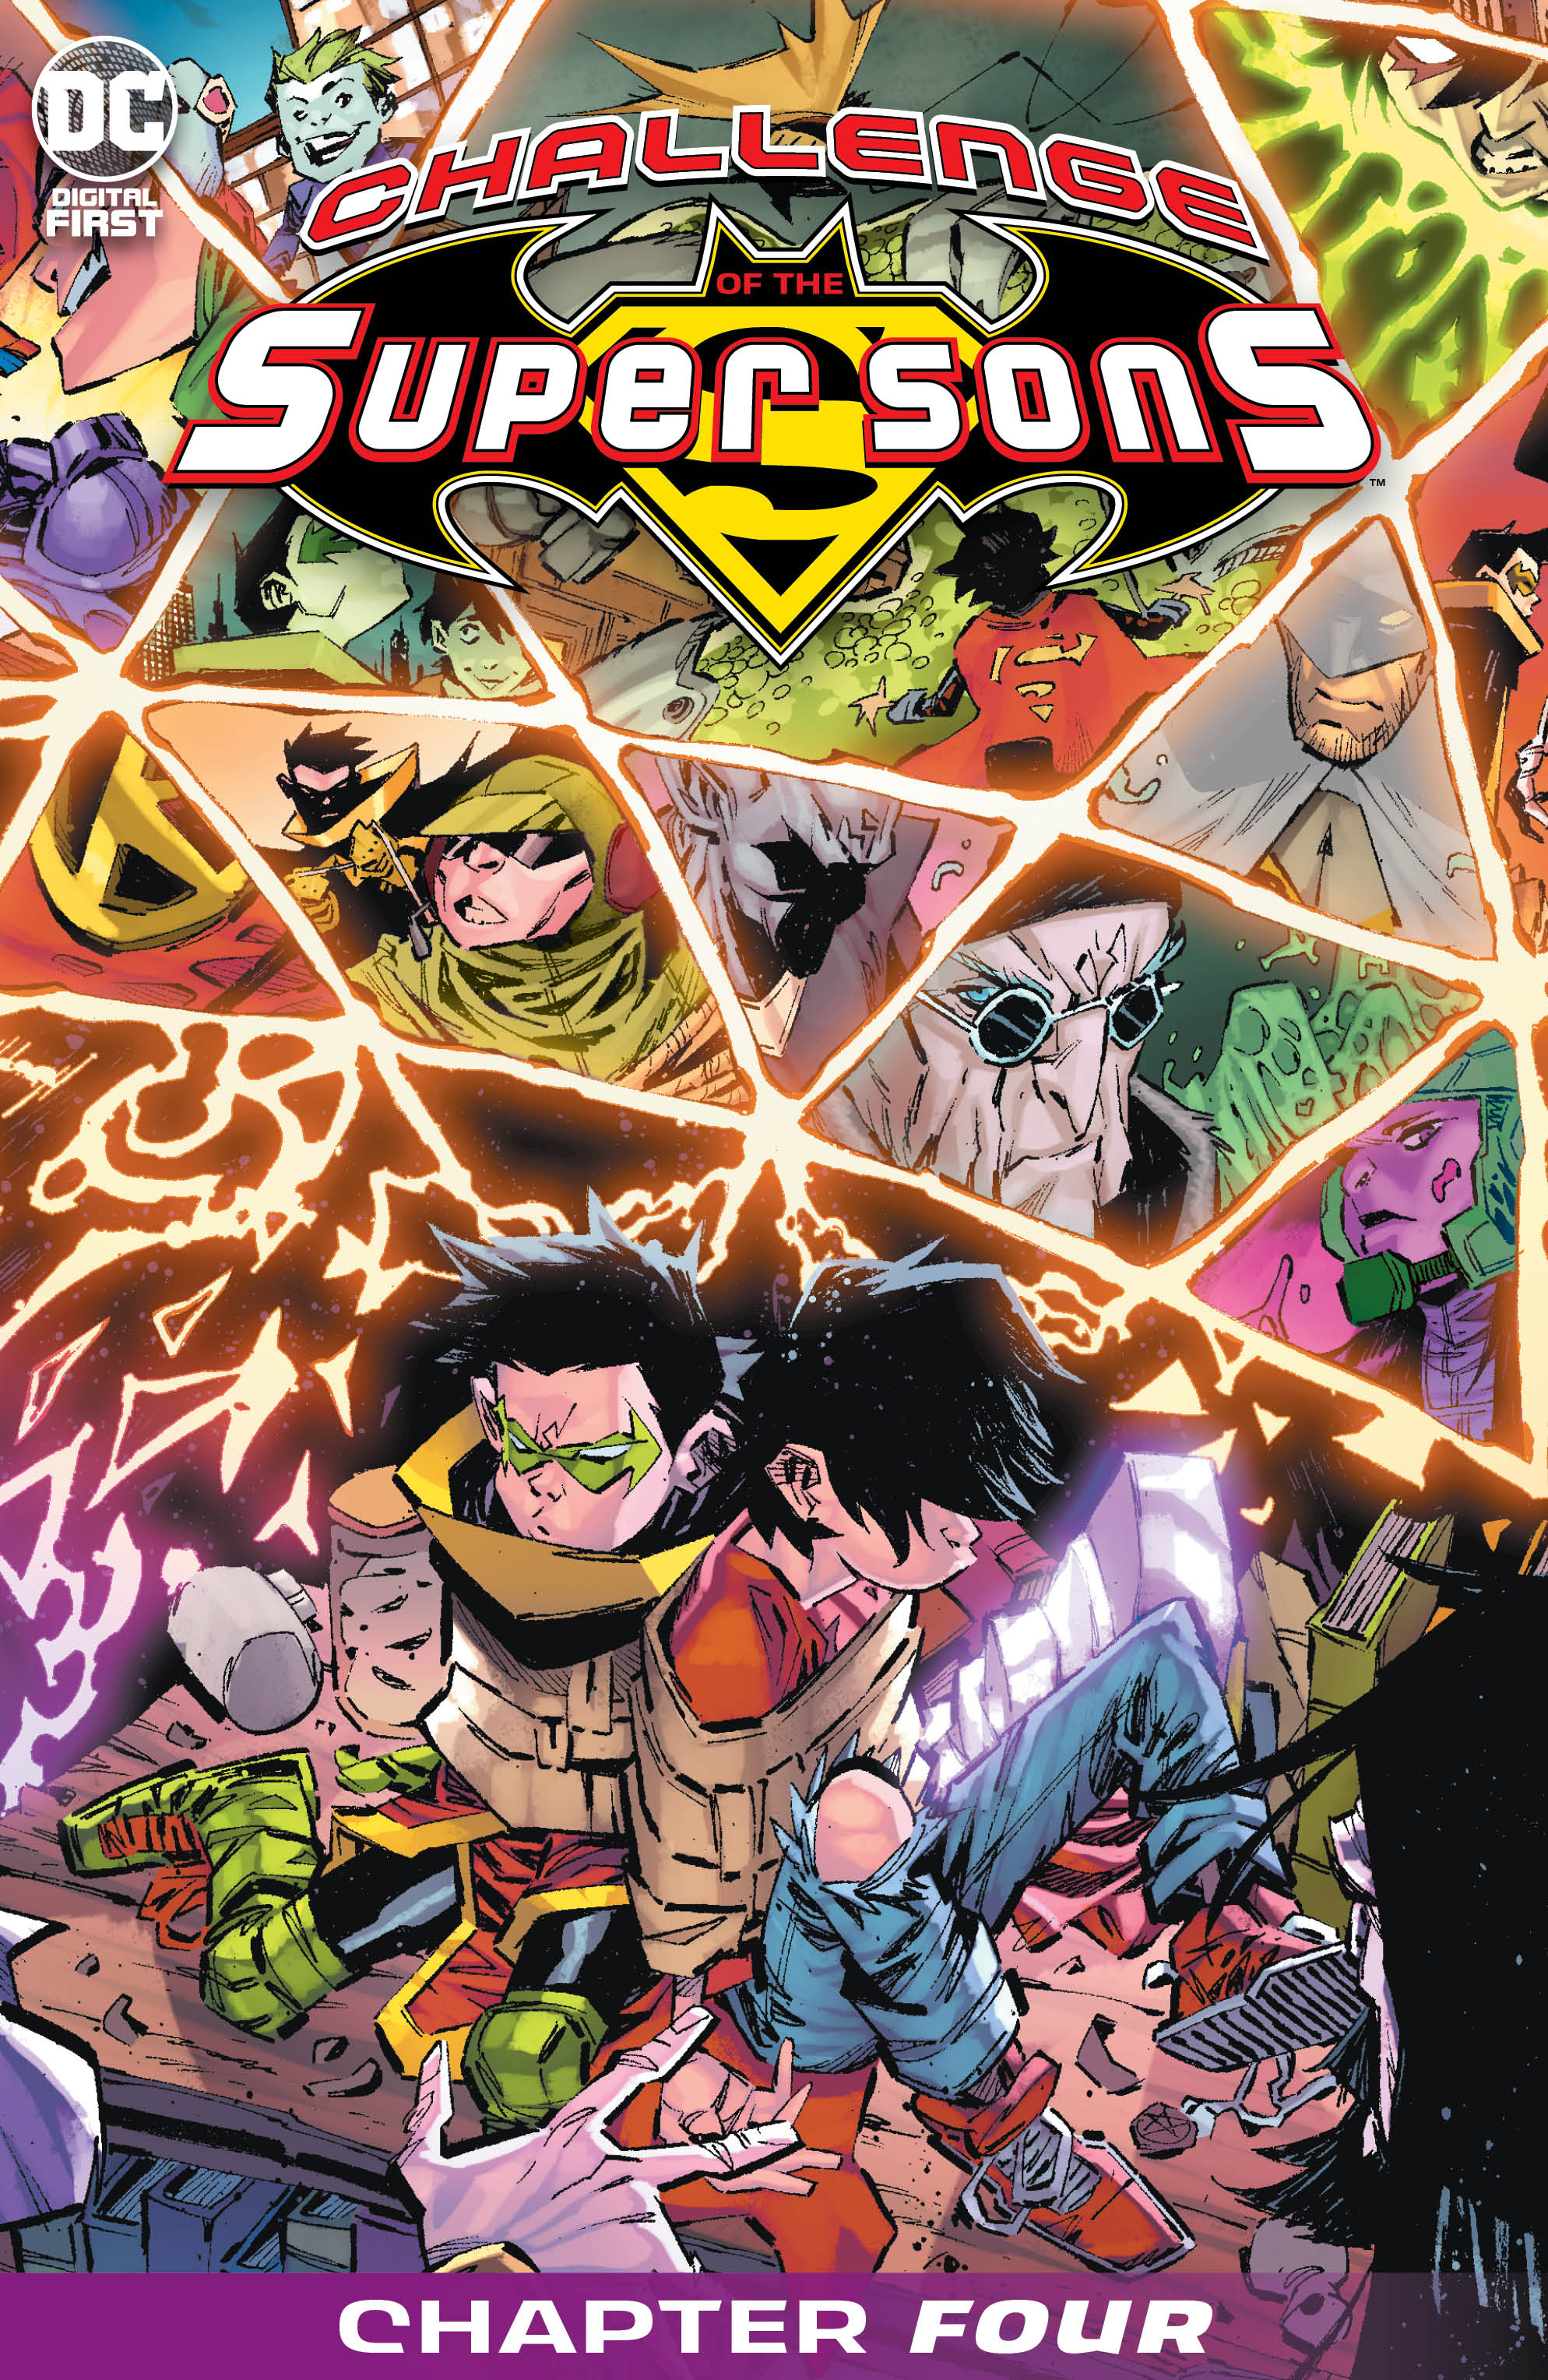 Challenge of the Super Sons #4 preview images